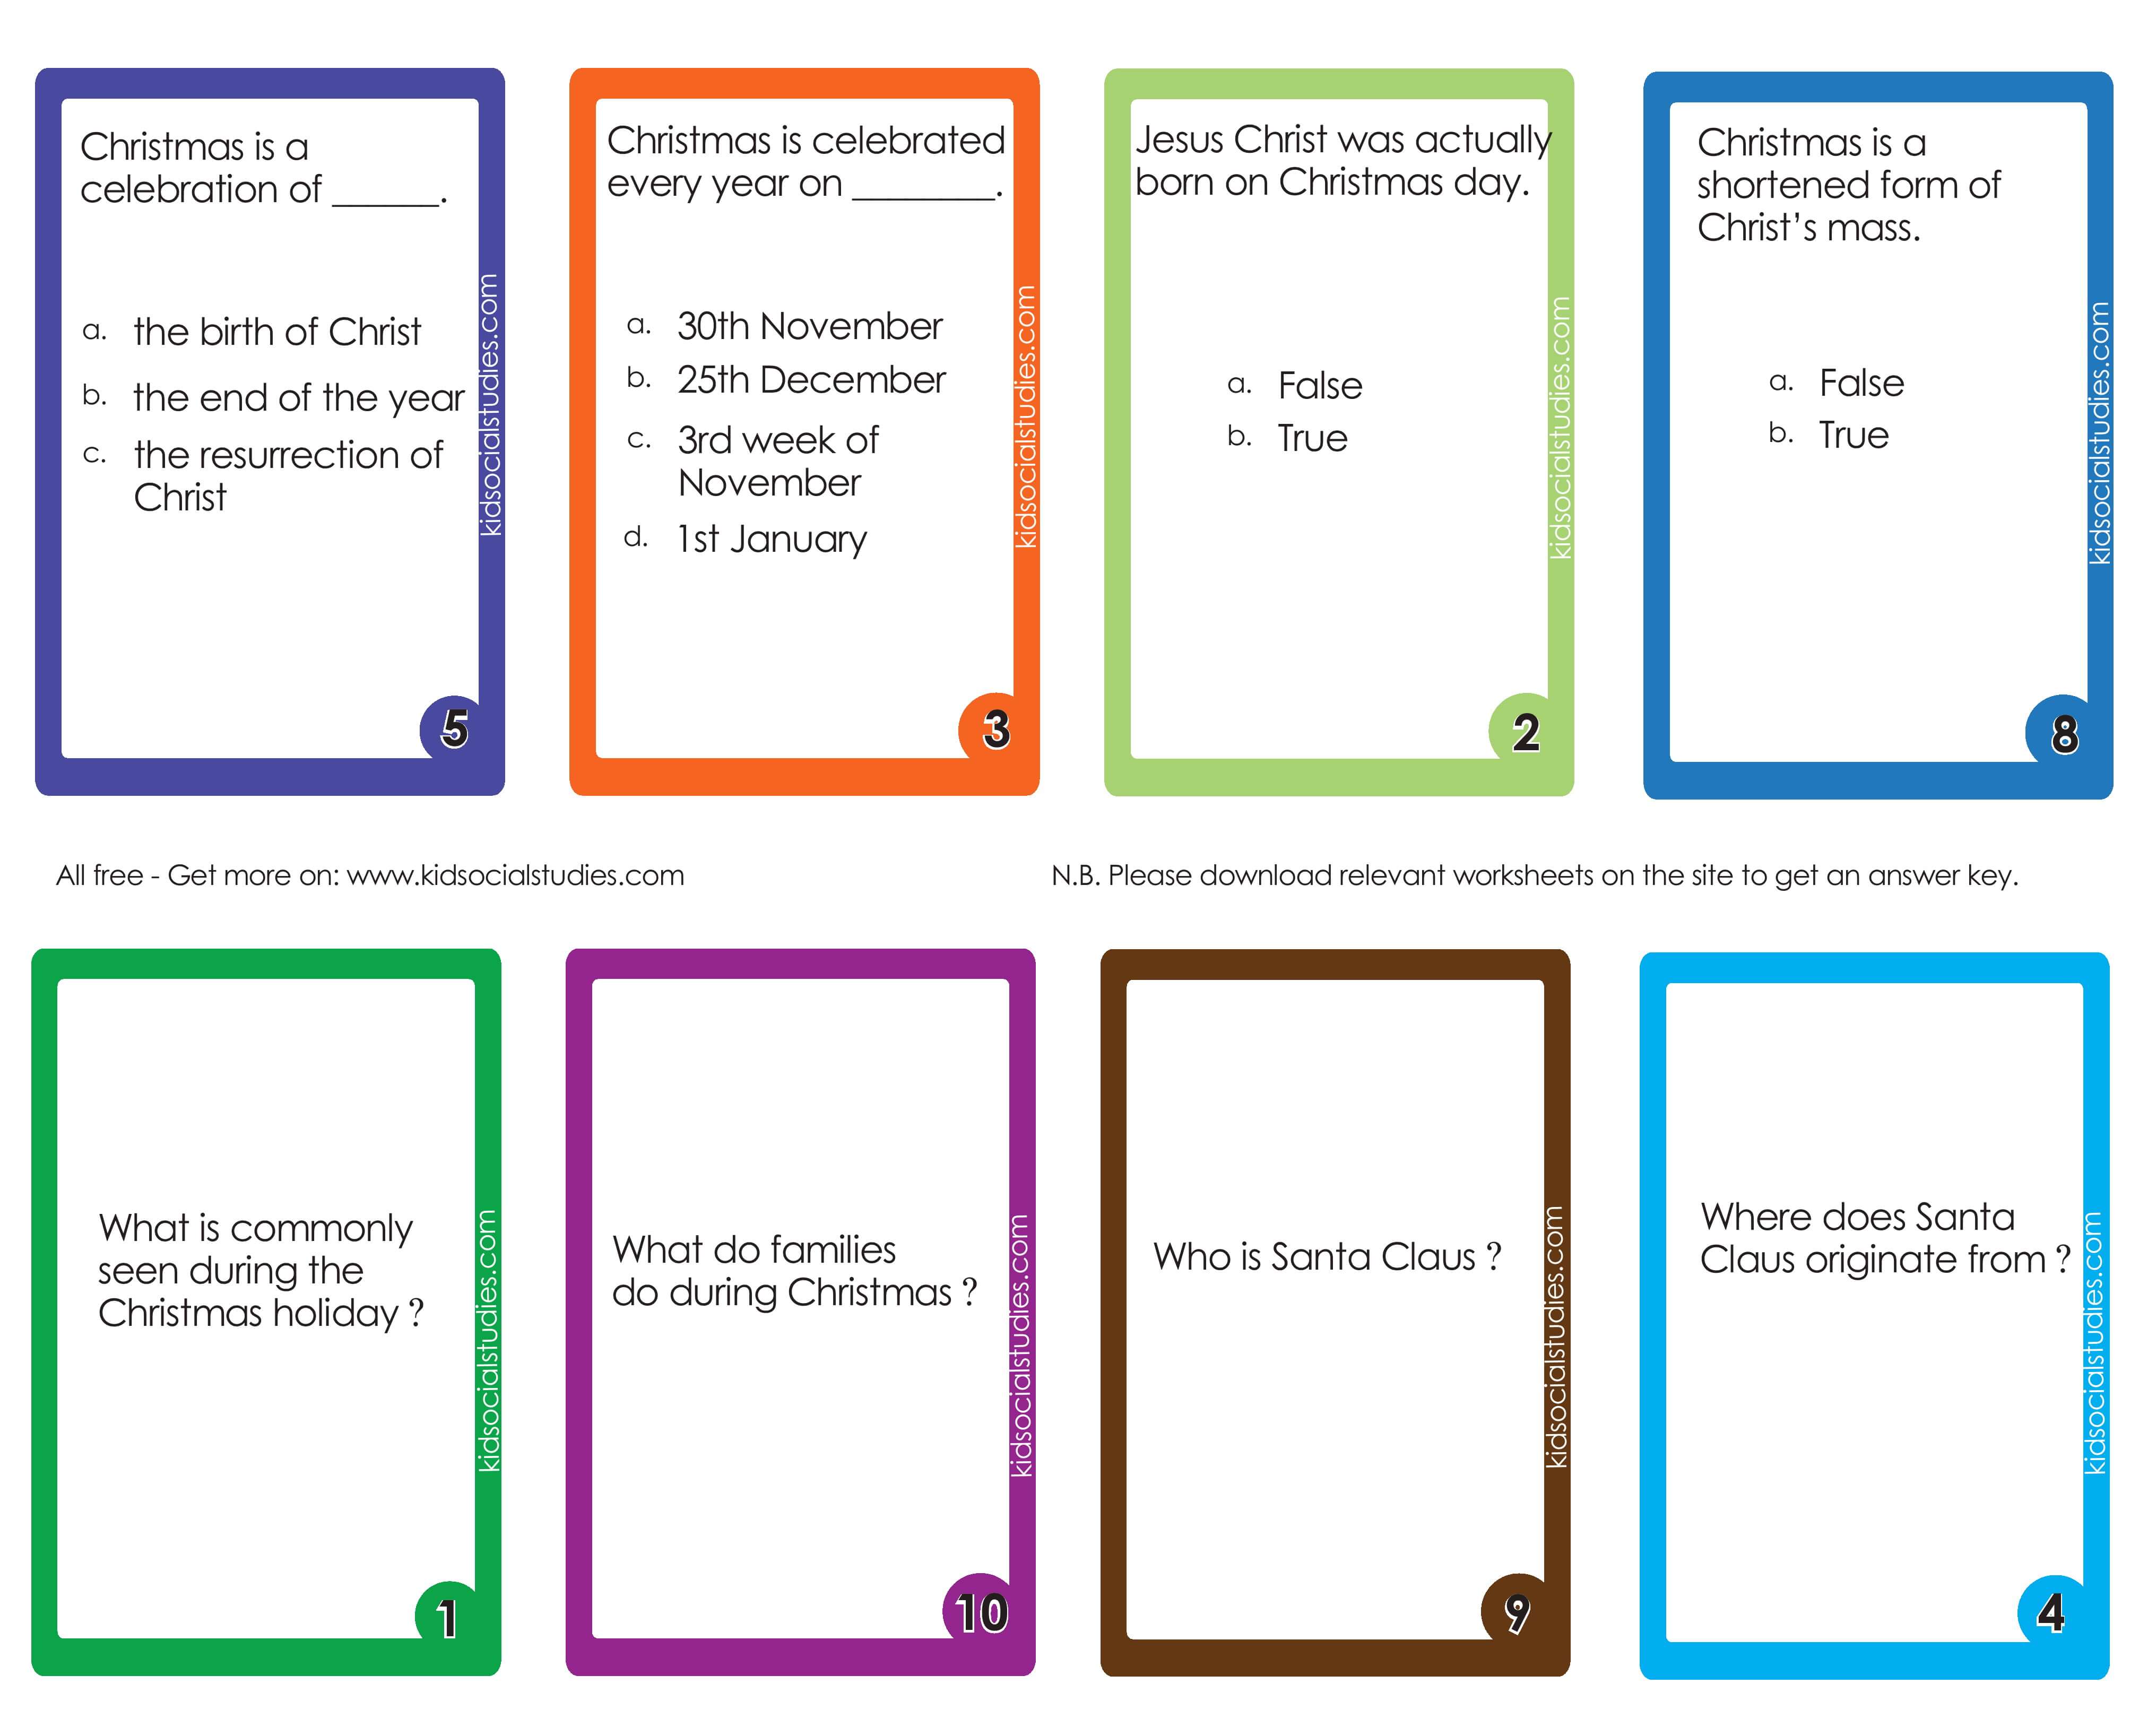 Christmas day celebrations flash cards for kids to review social studies skills.